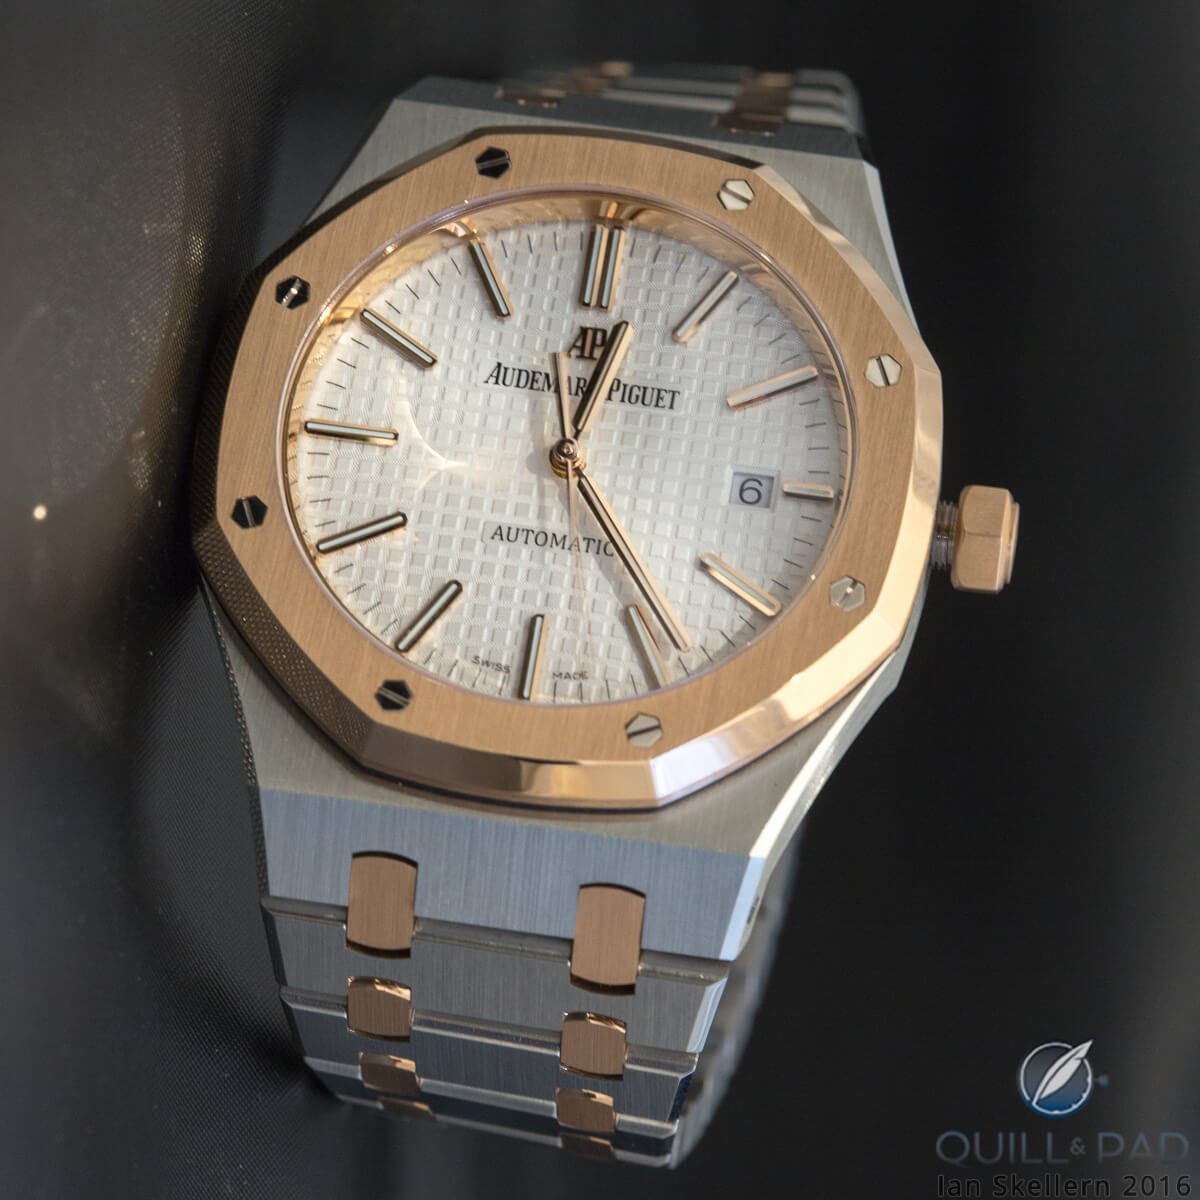 Audemars Piguet Two-Tone Selfwinding Royal Oak in a 41 mm stainless steel and pink gold case from 2015